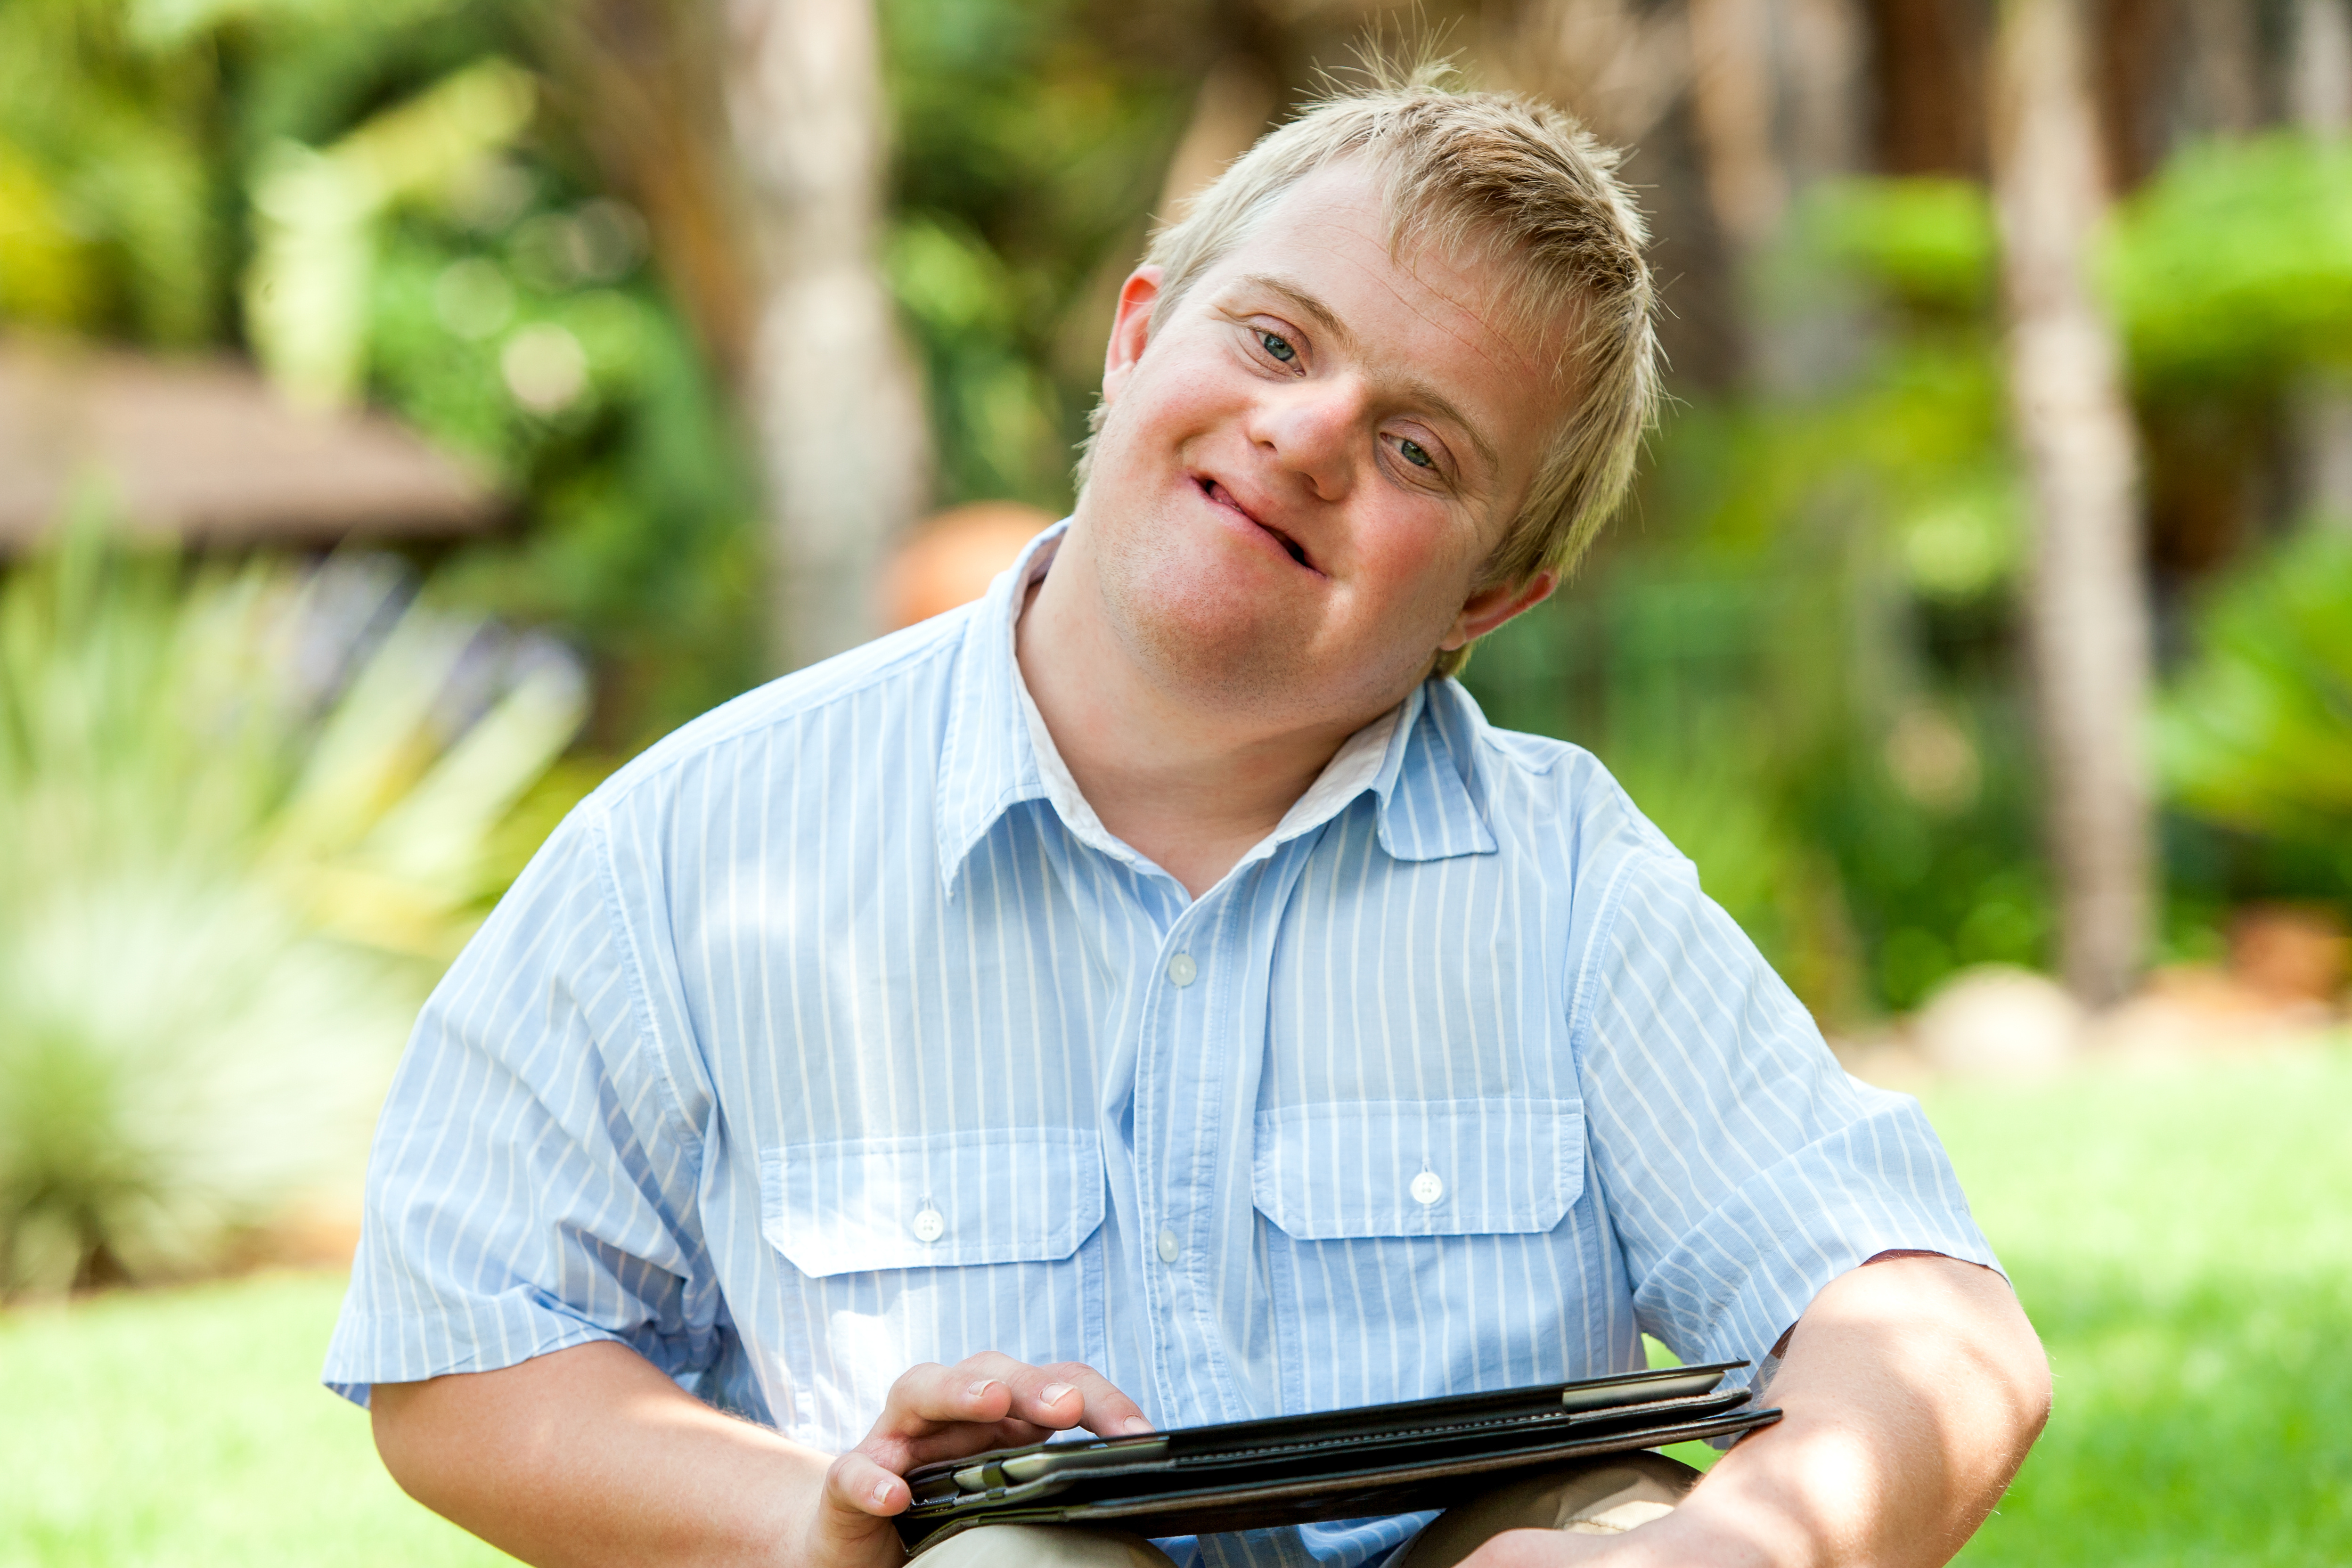 Teenager with moderate to severe disabilities accessing point-of-view video modeling